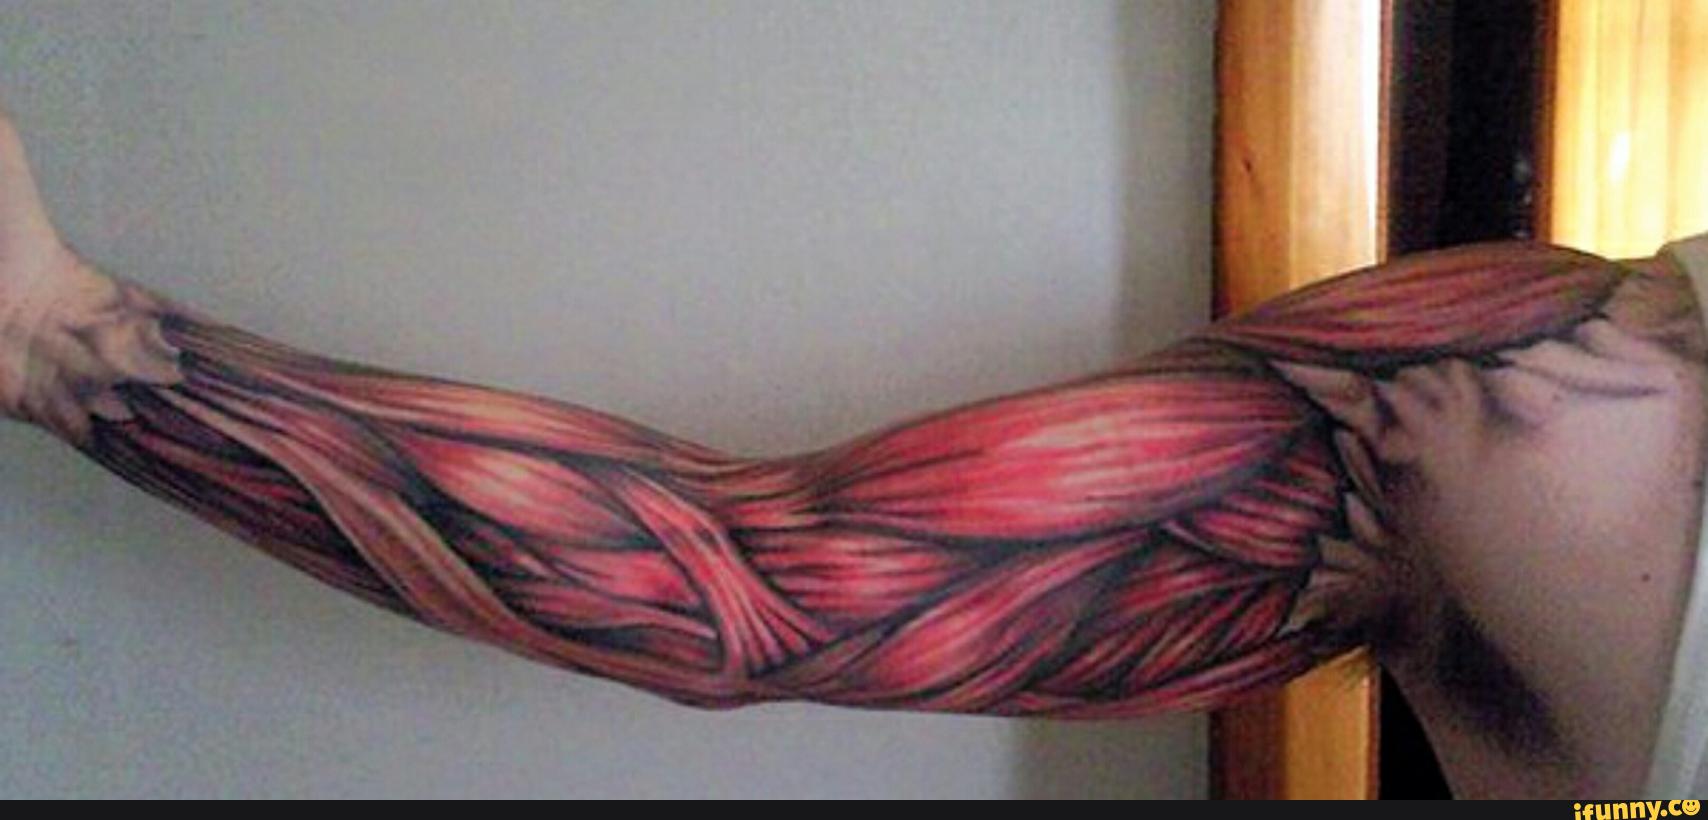 Amazing 3D Muscles Tattoo On Full Sleeve